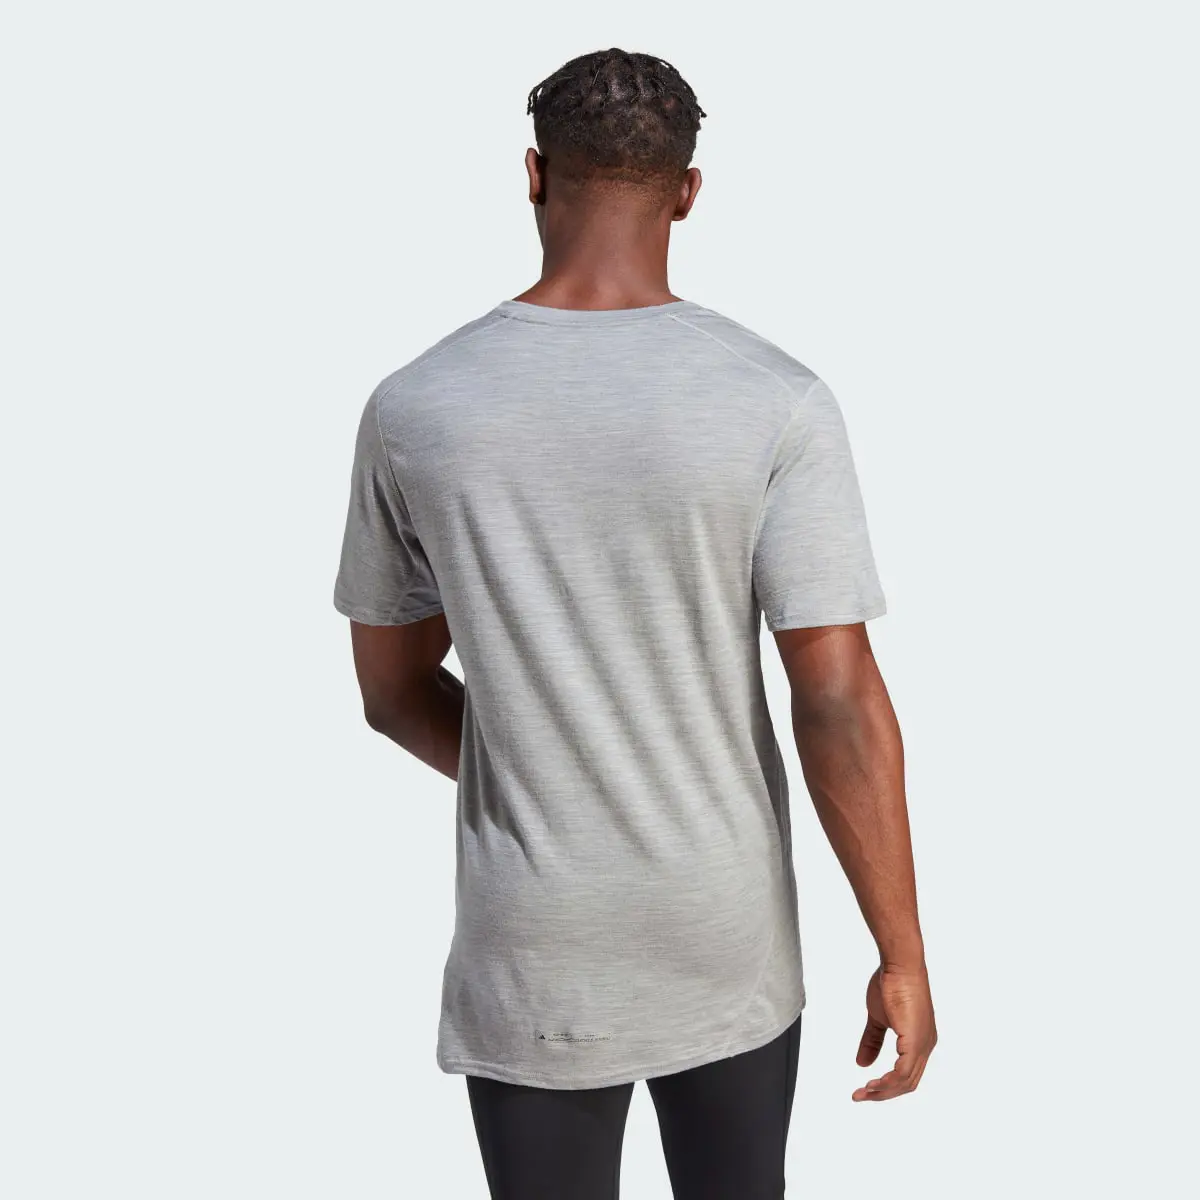 Adidas Ultimate Running Conquer the Elements Merino Tee. 3